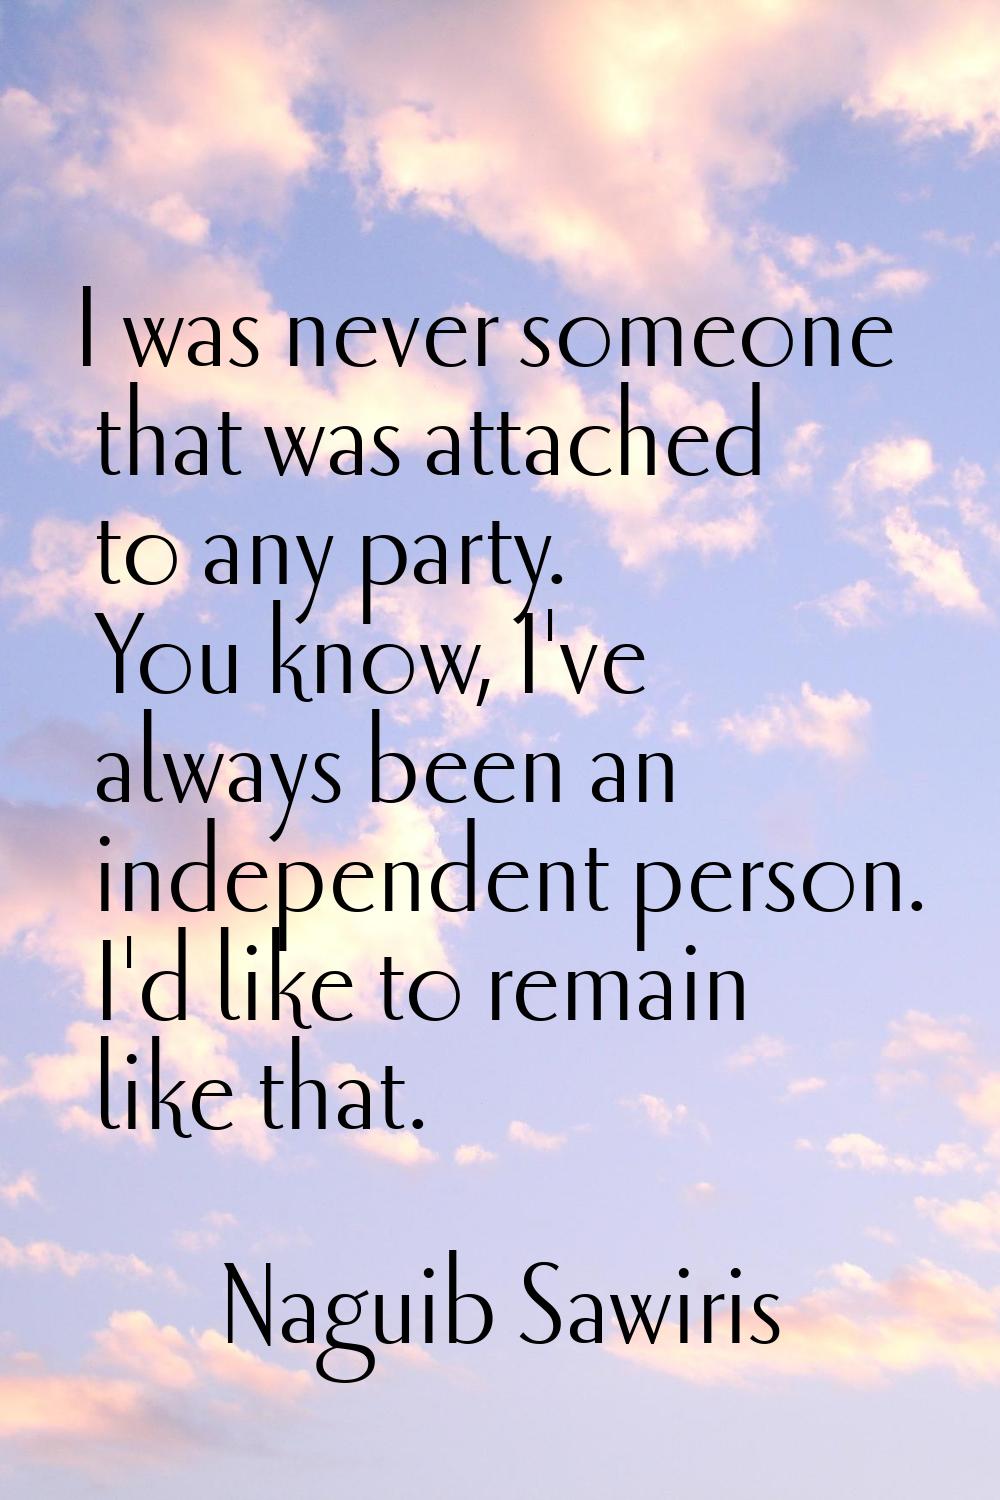 I was never someone that was attached to any party. You know, I've always been an independent perso